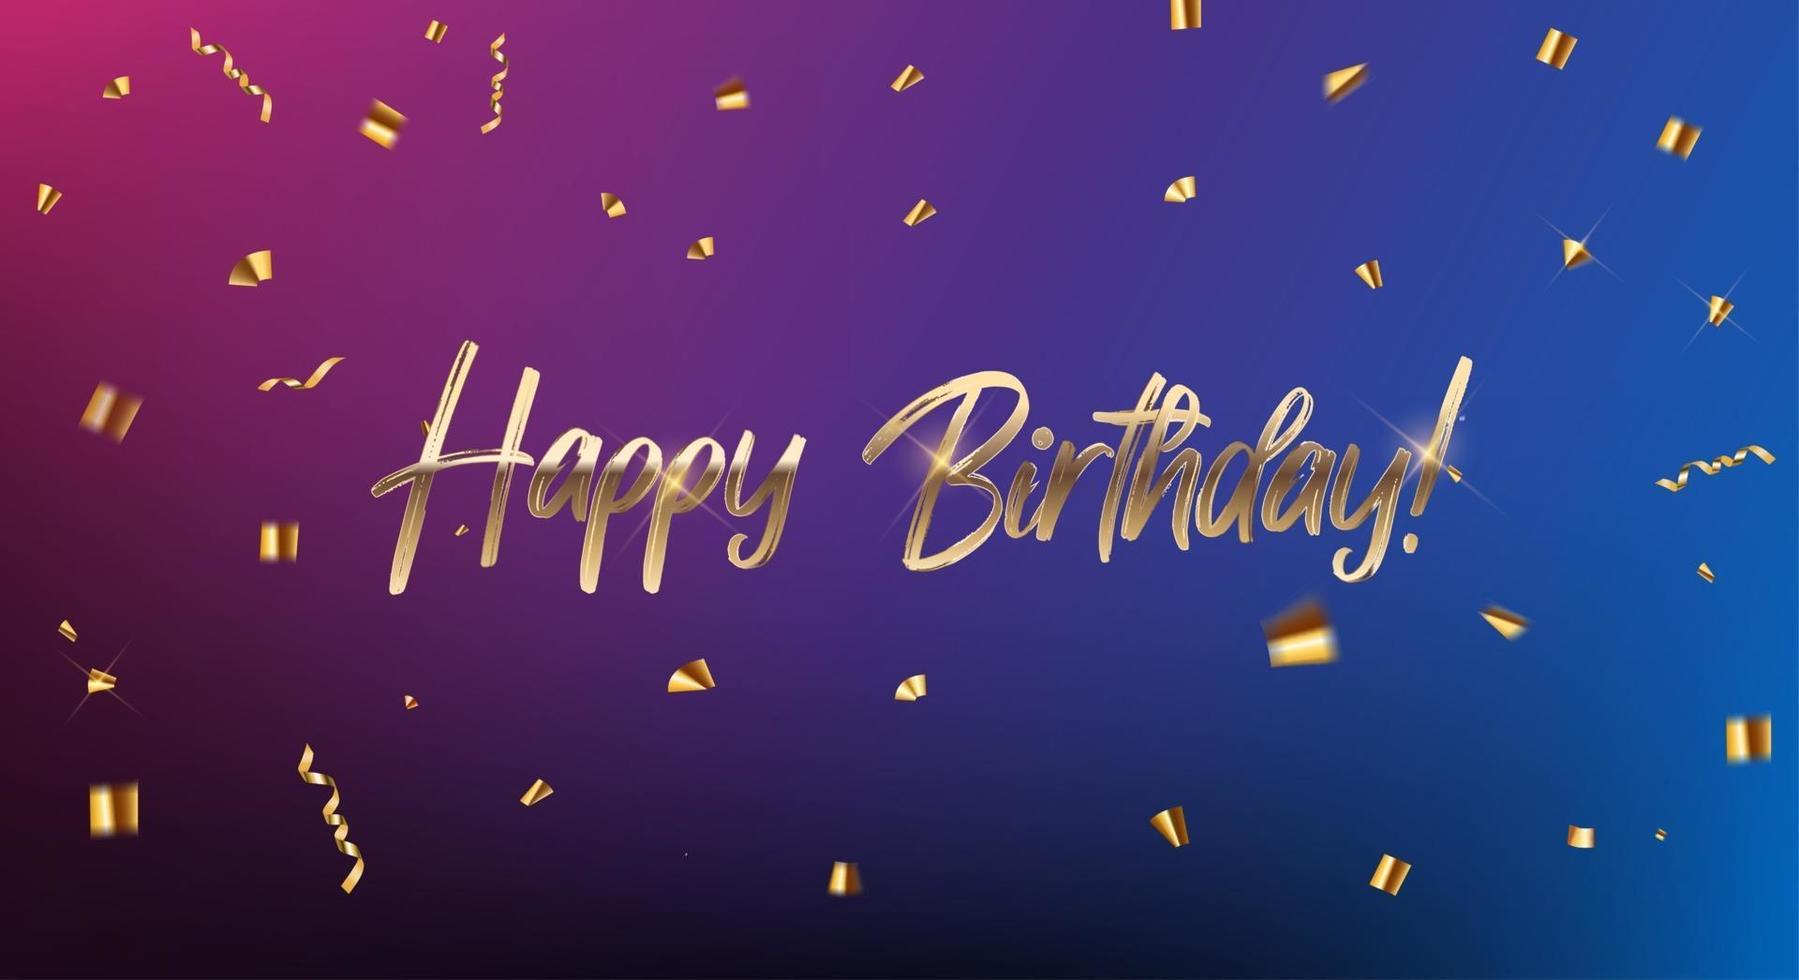 Happy Birthday congratulations banner design with Confetti and Glossy Glitter Ribbon for Party Holiday Background vector